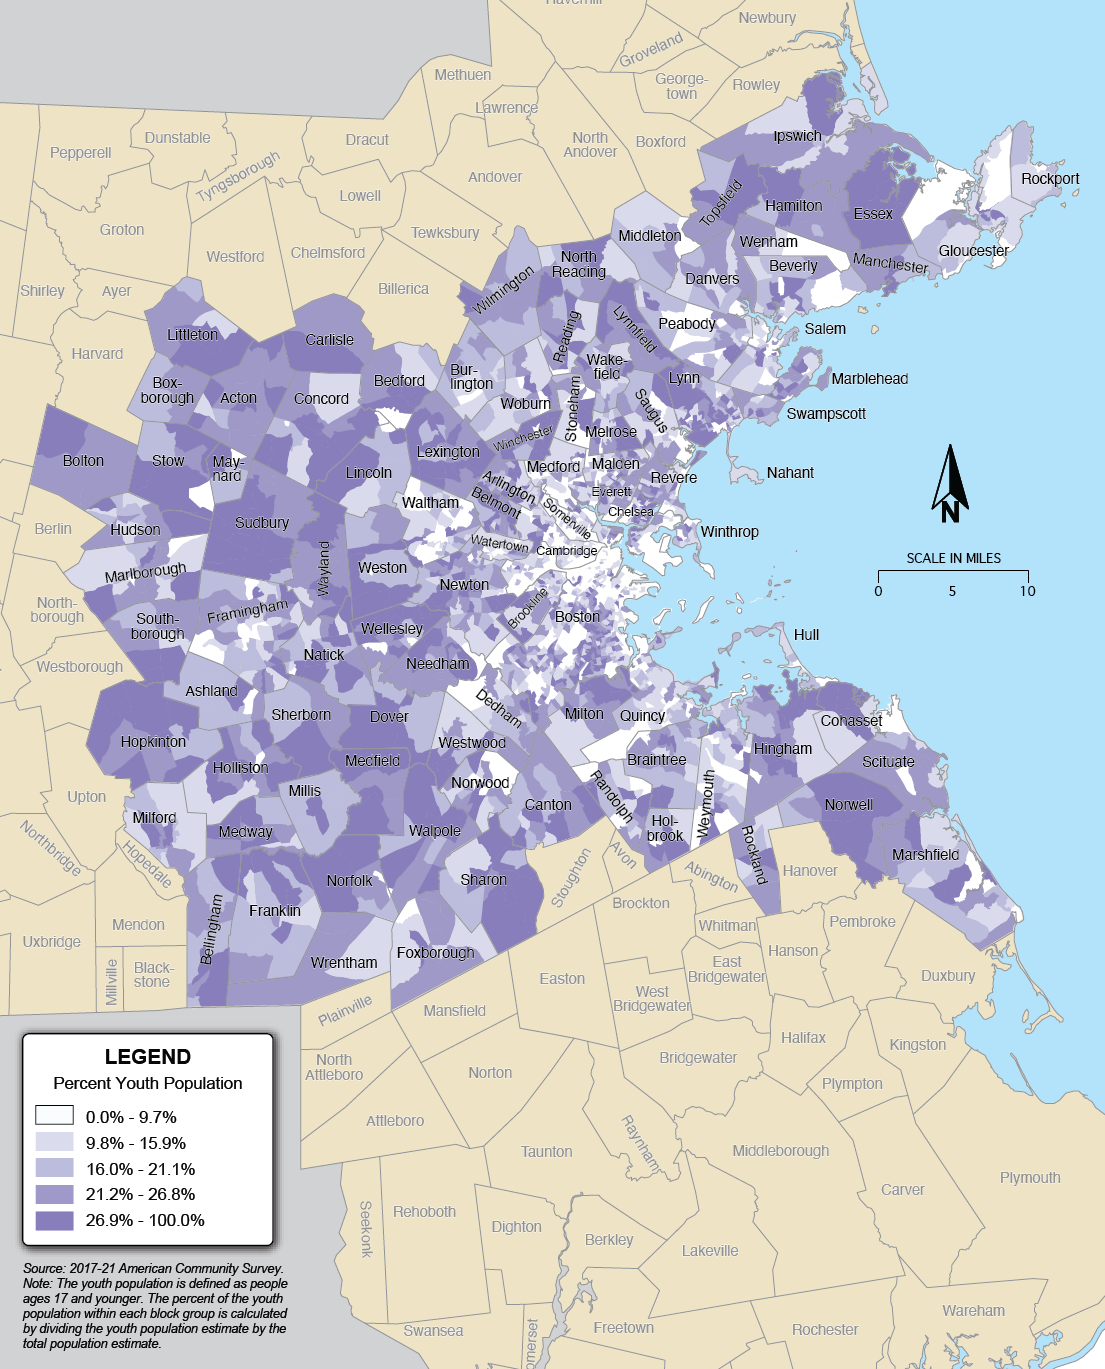 A map showing the percentage of the Youth Population in the Boston Region.